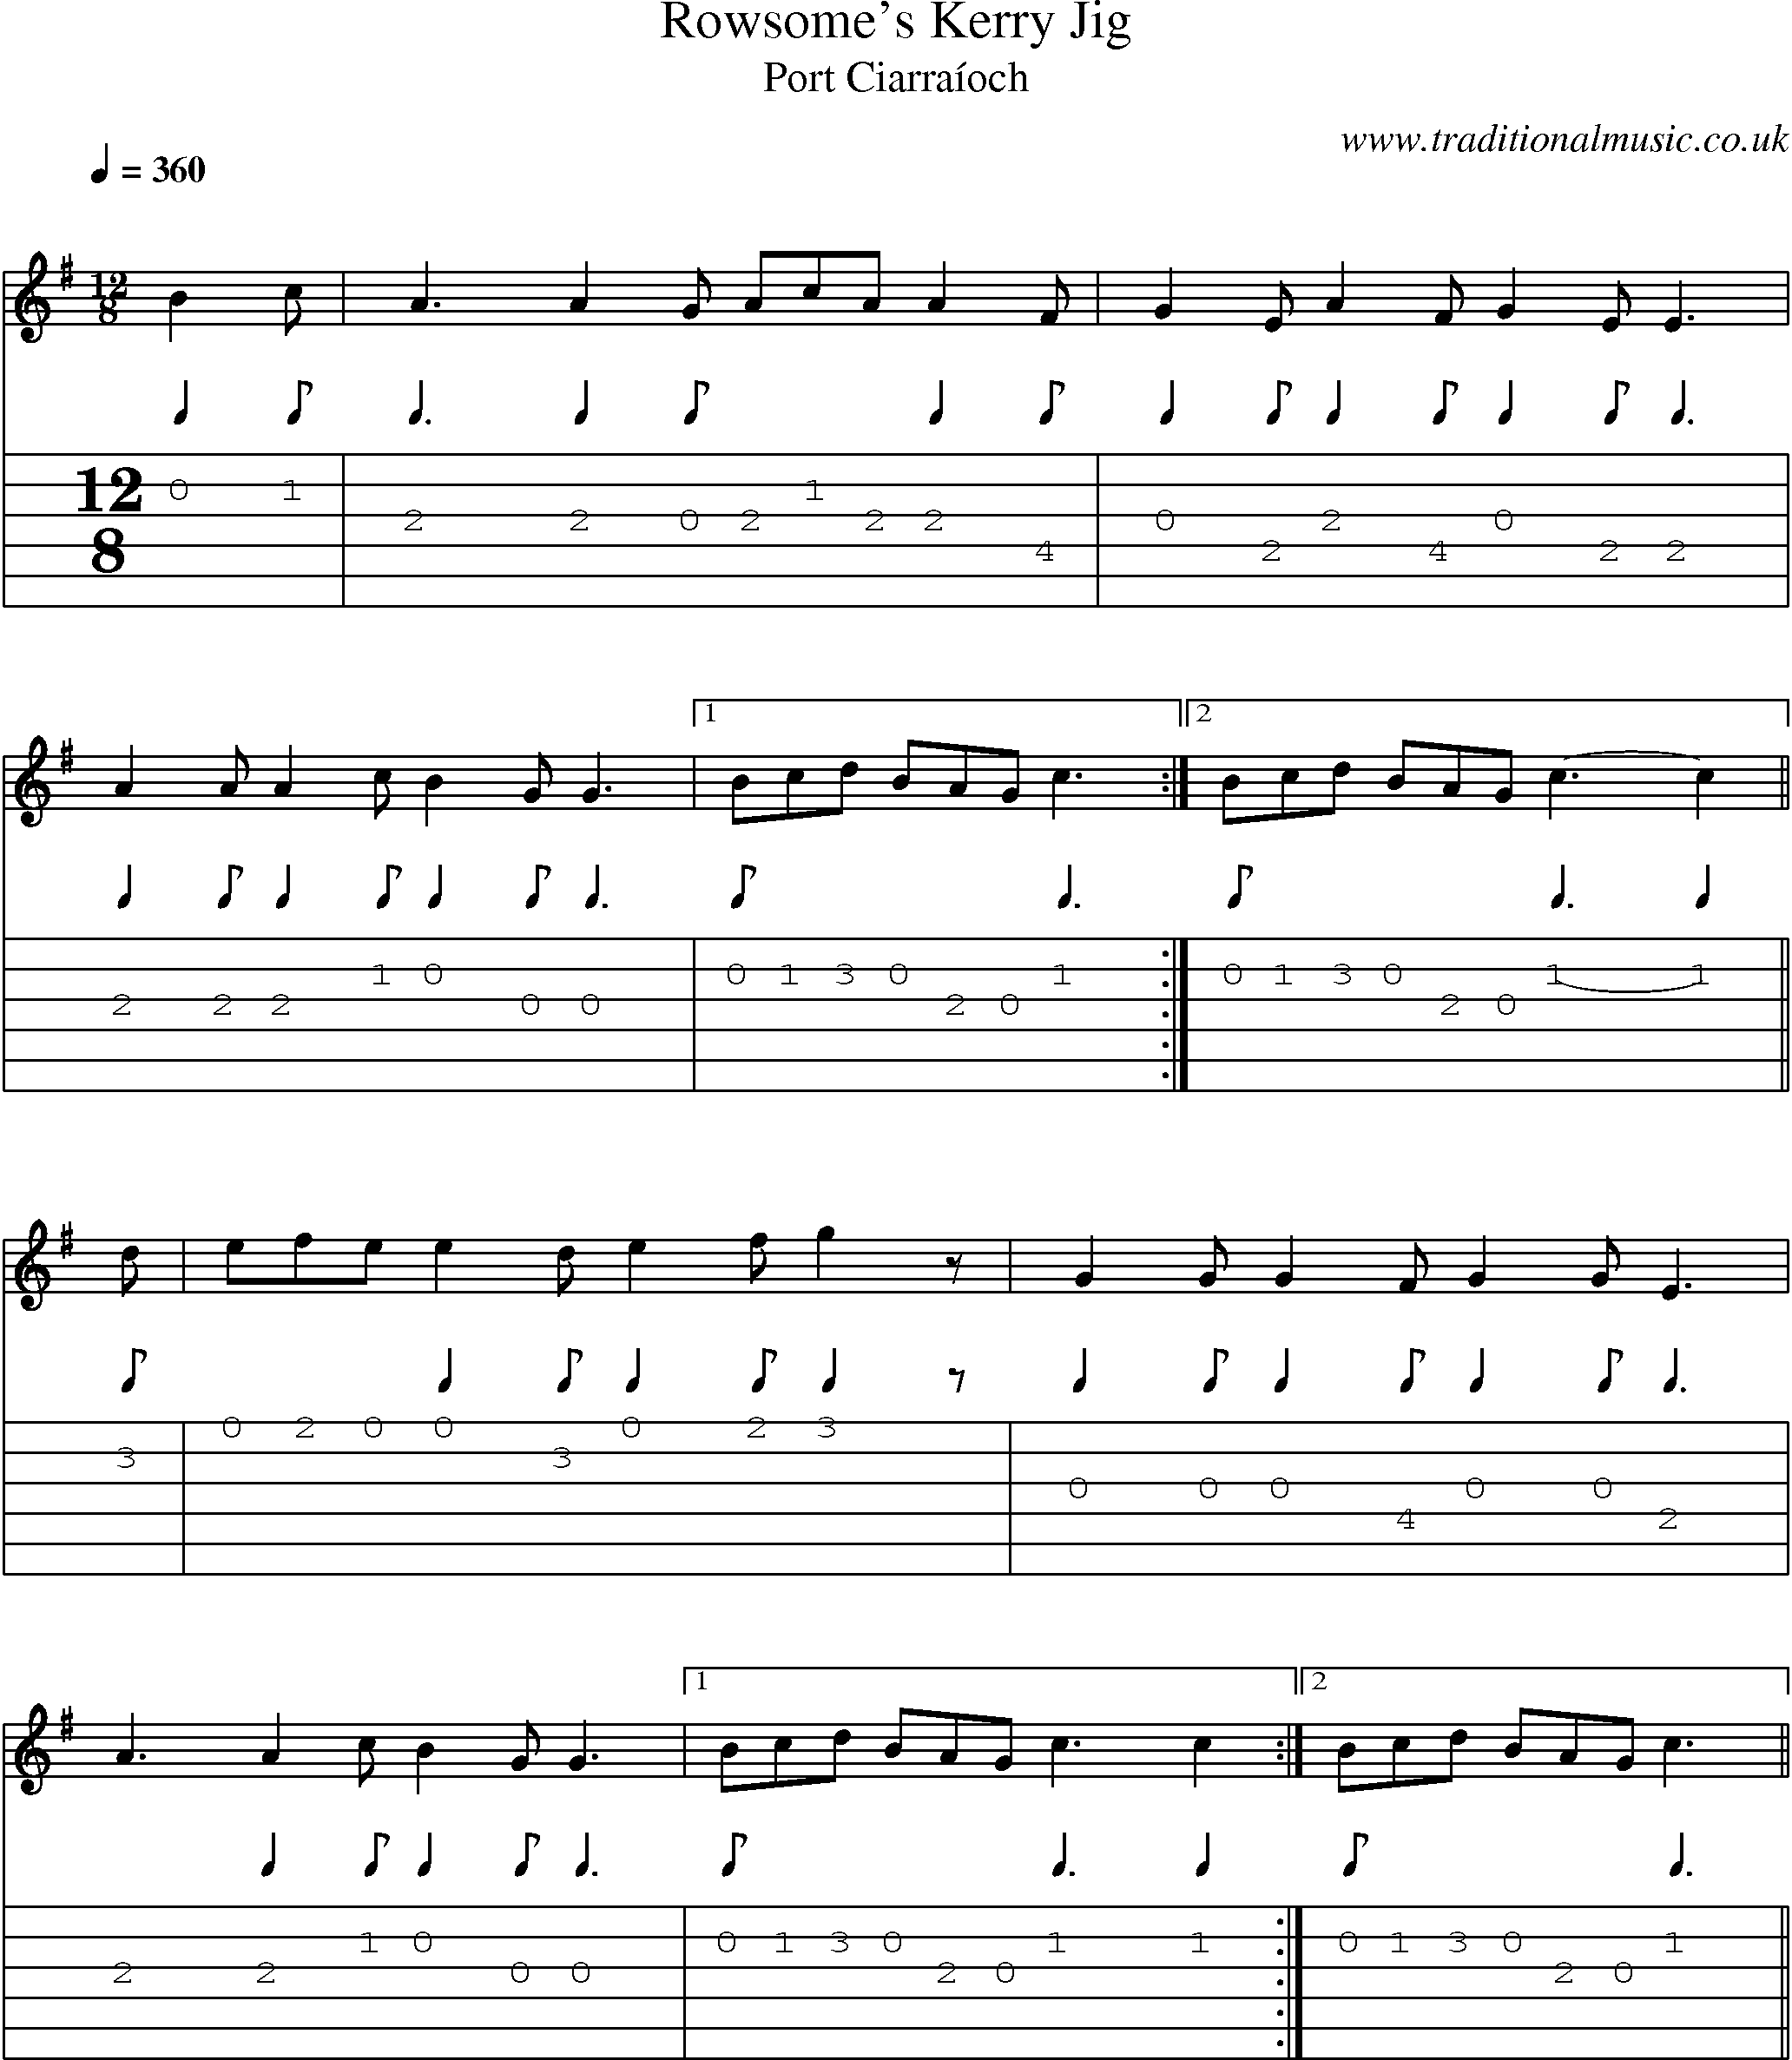 Music Score and Guitar Tabs for Rowsomes Kerry Jig